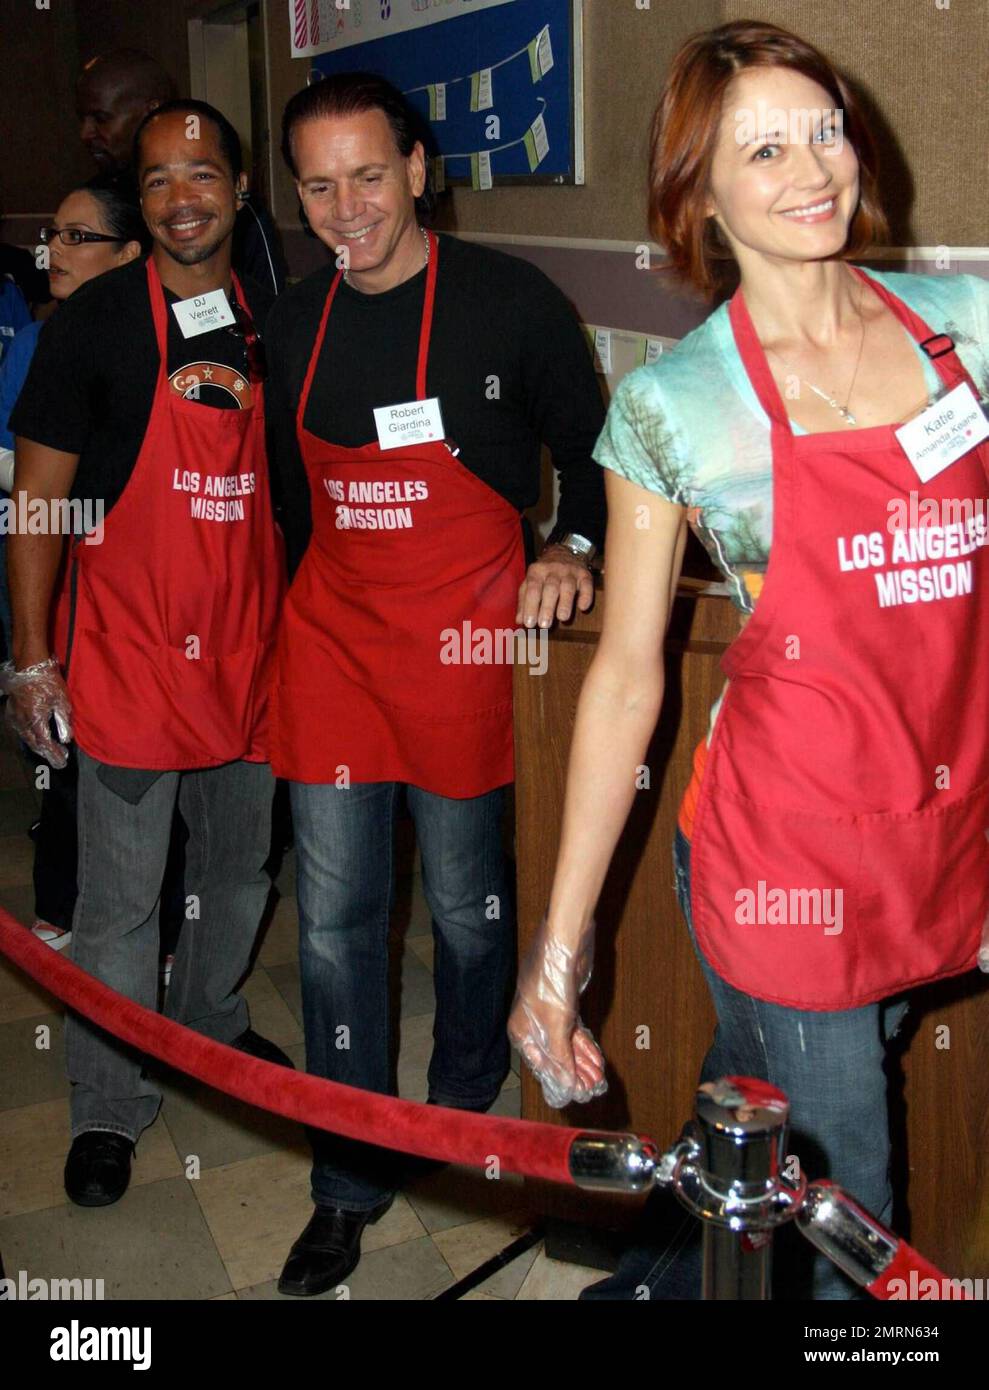 Robert Giardina, DJ Verrett and Katie Amanda Keane participate in the Los Angeles Mission Good Friday Event that features hundreds of volunteers serving the homeless. The event also included a foot washing tent and a shoe fitting area. Los Angeles, CA. 4/10/09. F Stock Photo